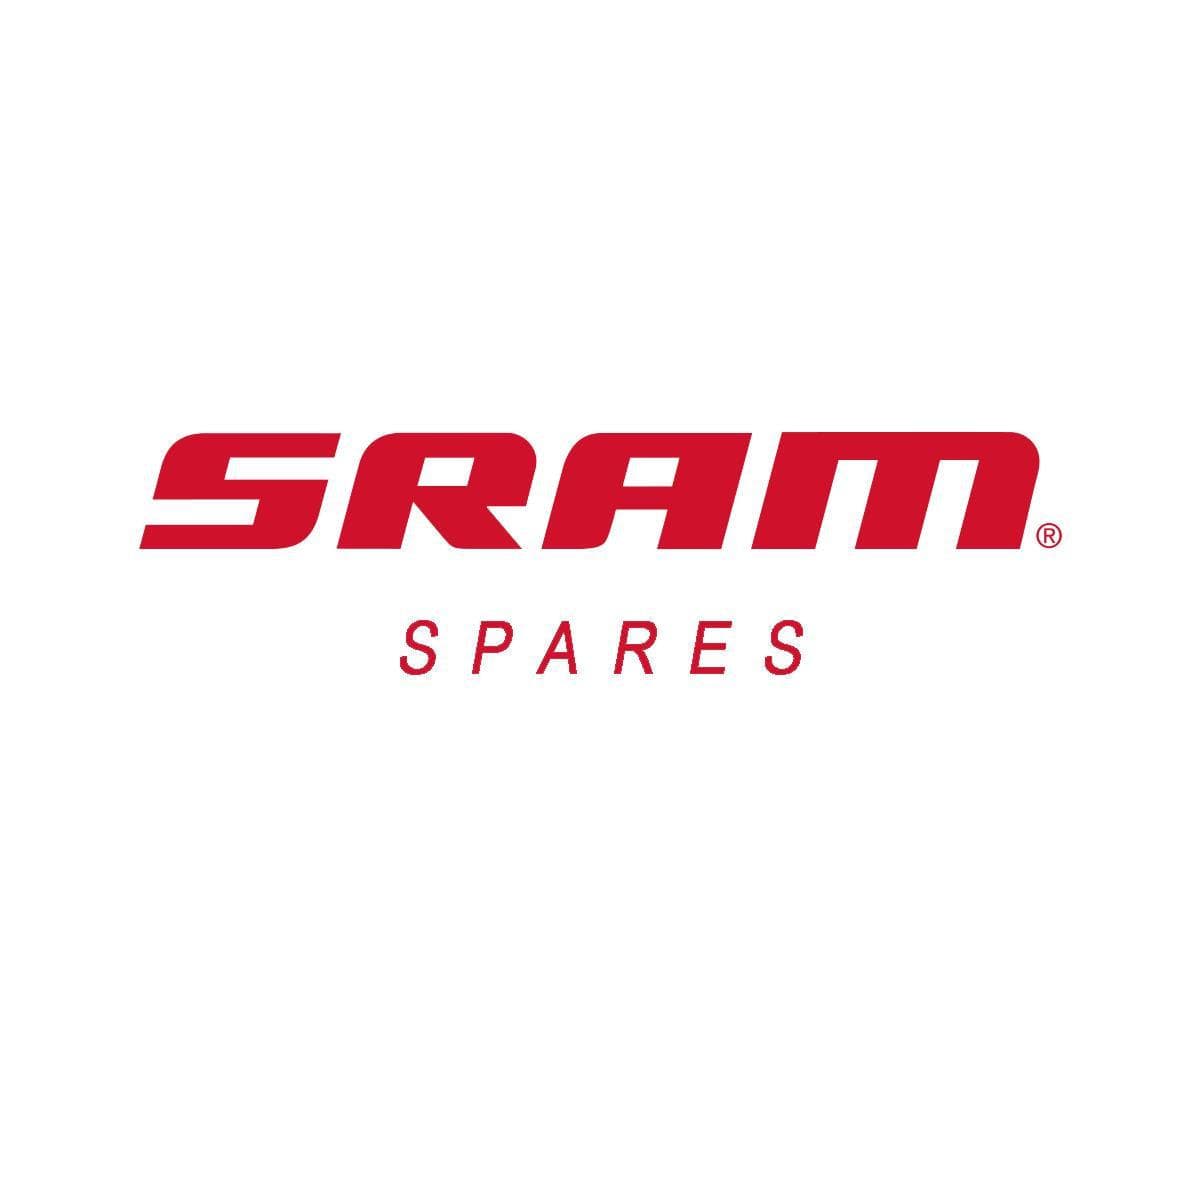 Sram Spare - Wheel Spare Parts Kit Complete Axle Assembly (Includes Axle,Threaded Lock Nuts And End Caps) - Mth-746 Xd Rear: